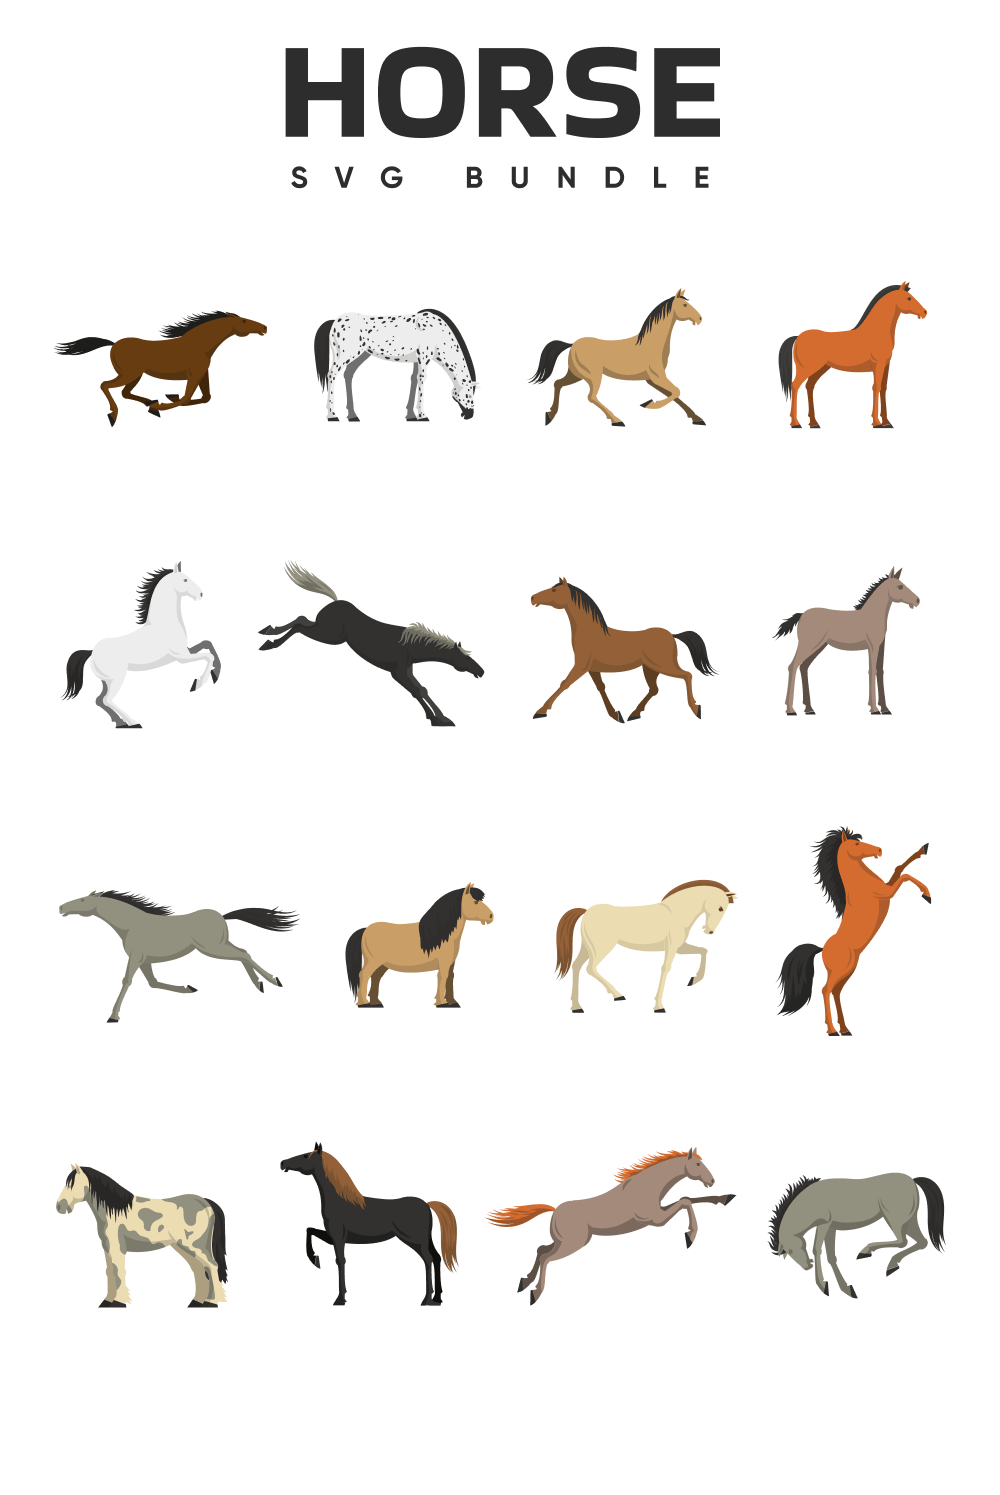 Sixteen images of different horses in different positions with a large caption at the top.